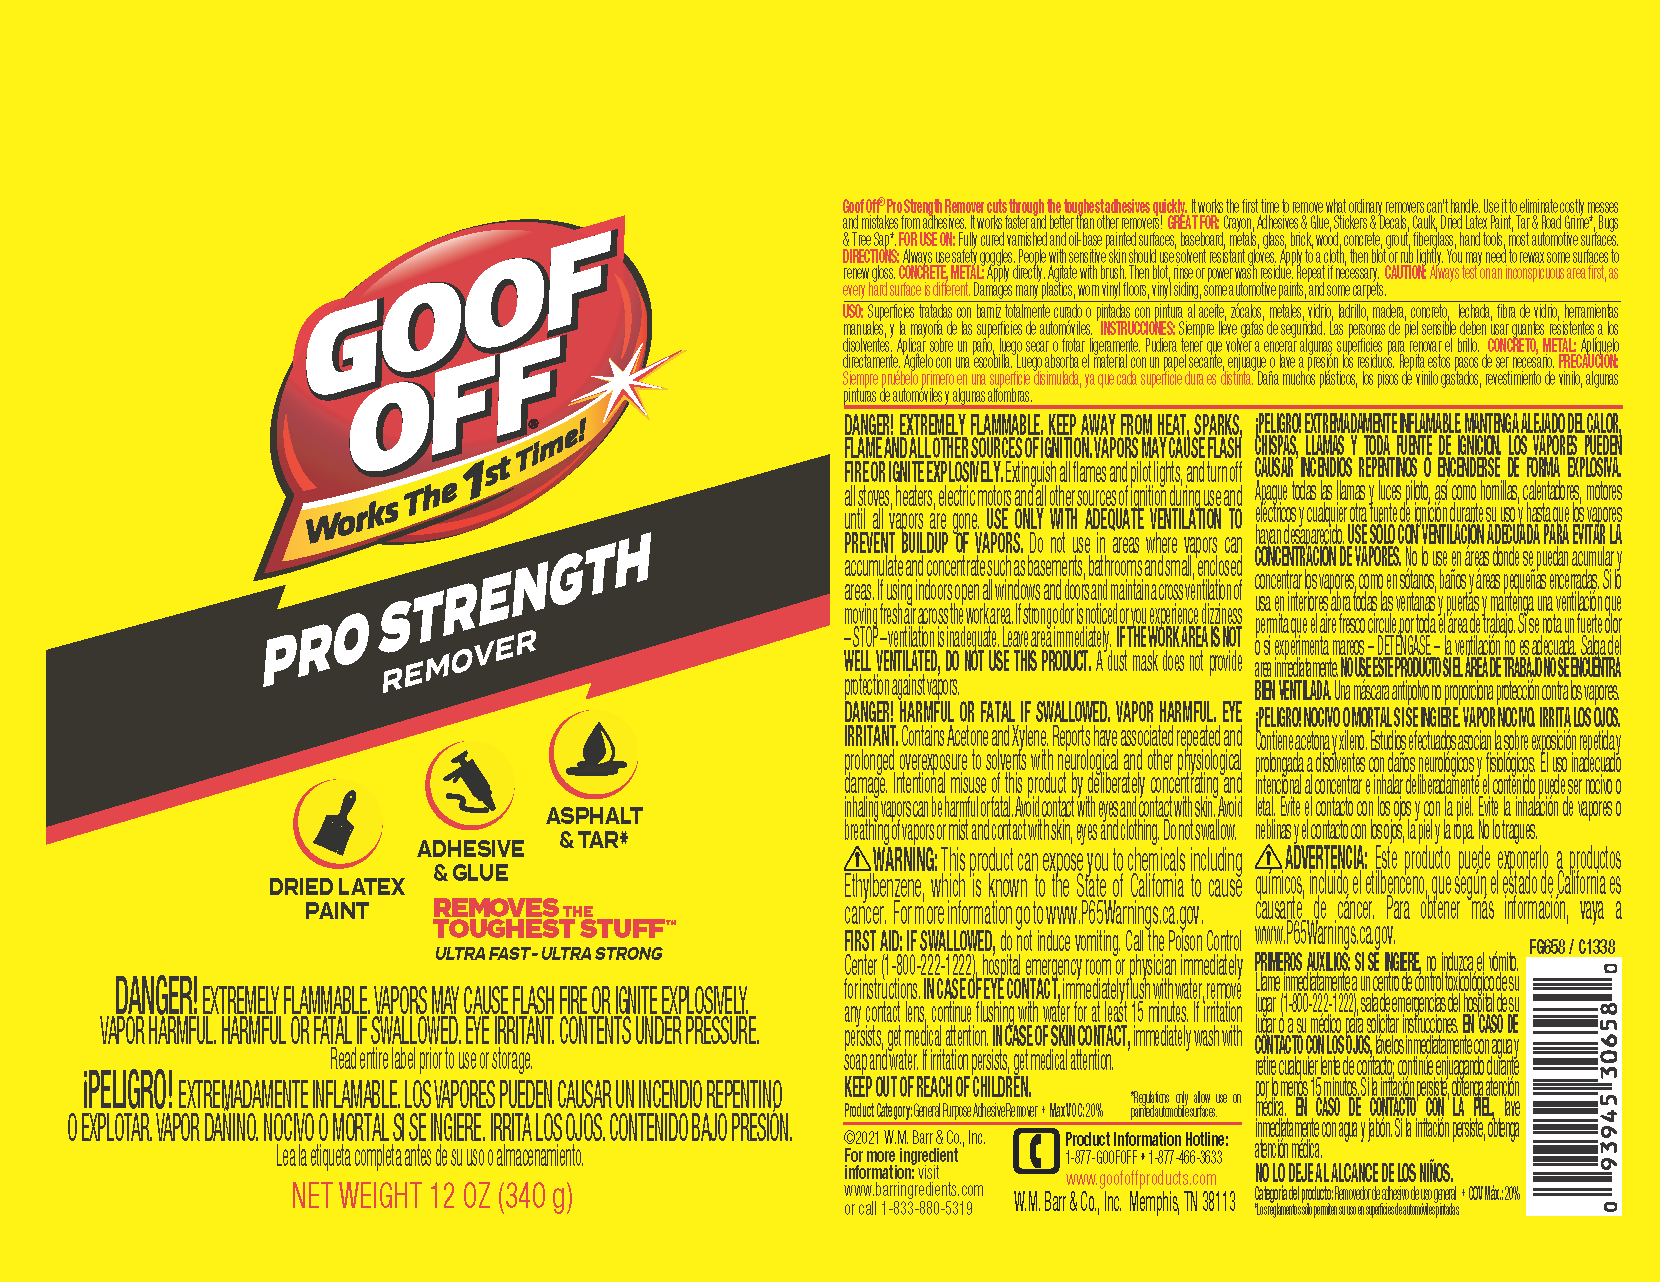 Goof Off Professional Strength Remover 